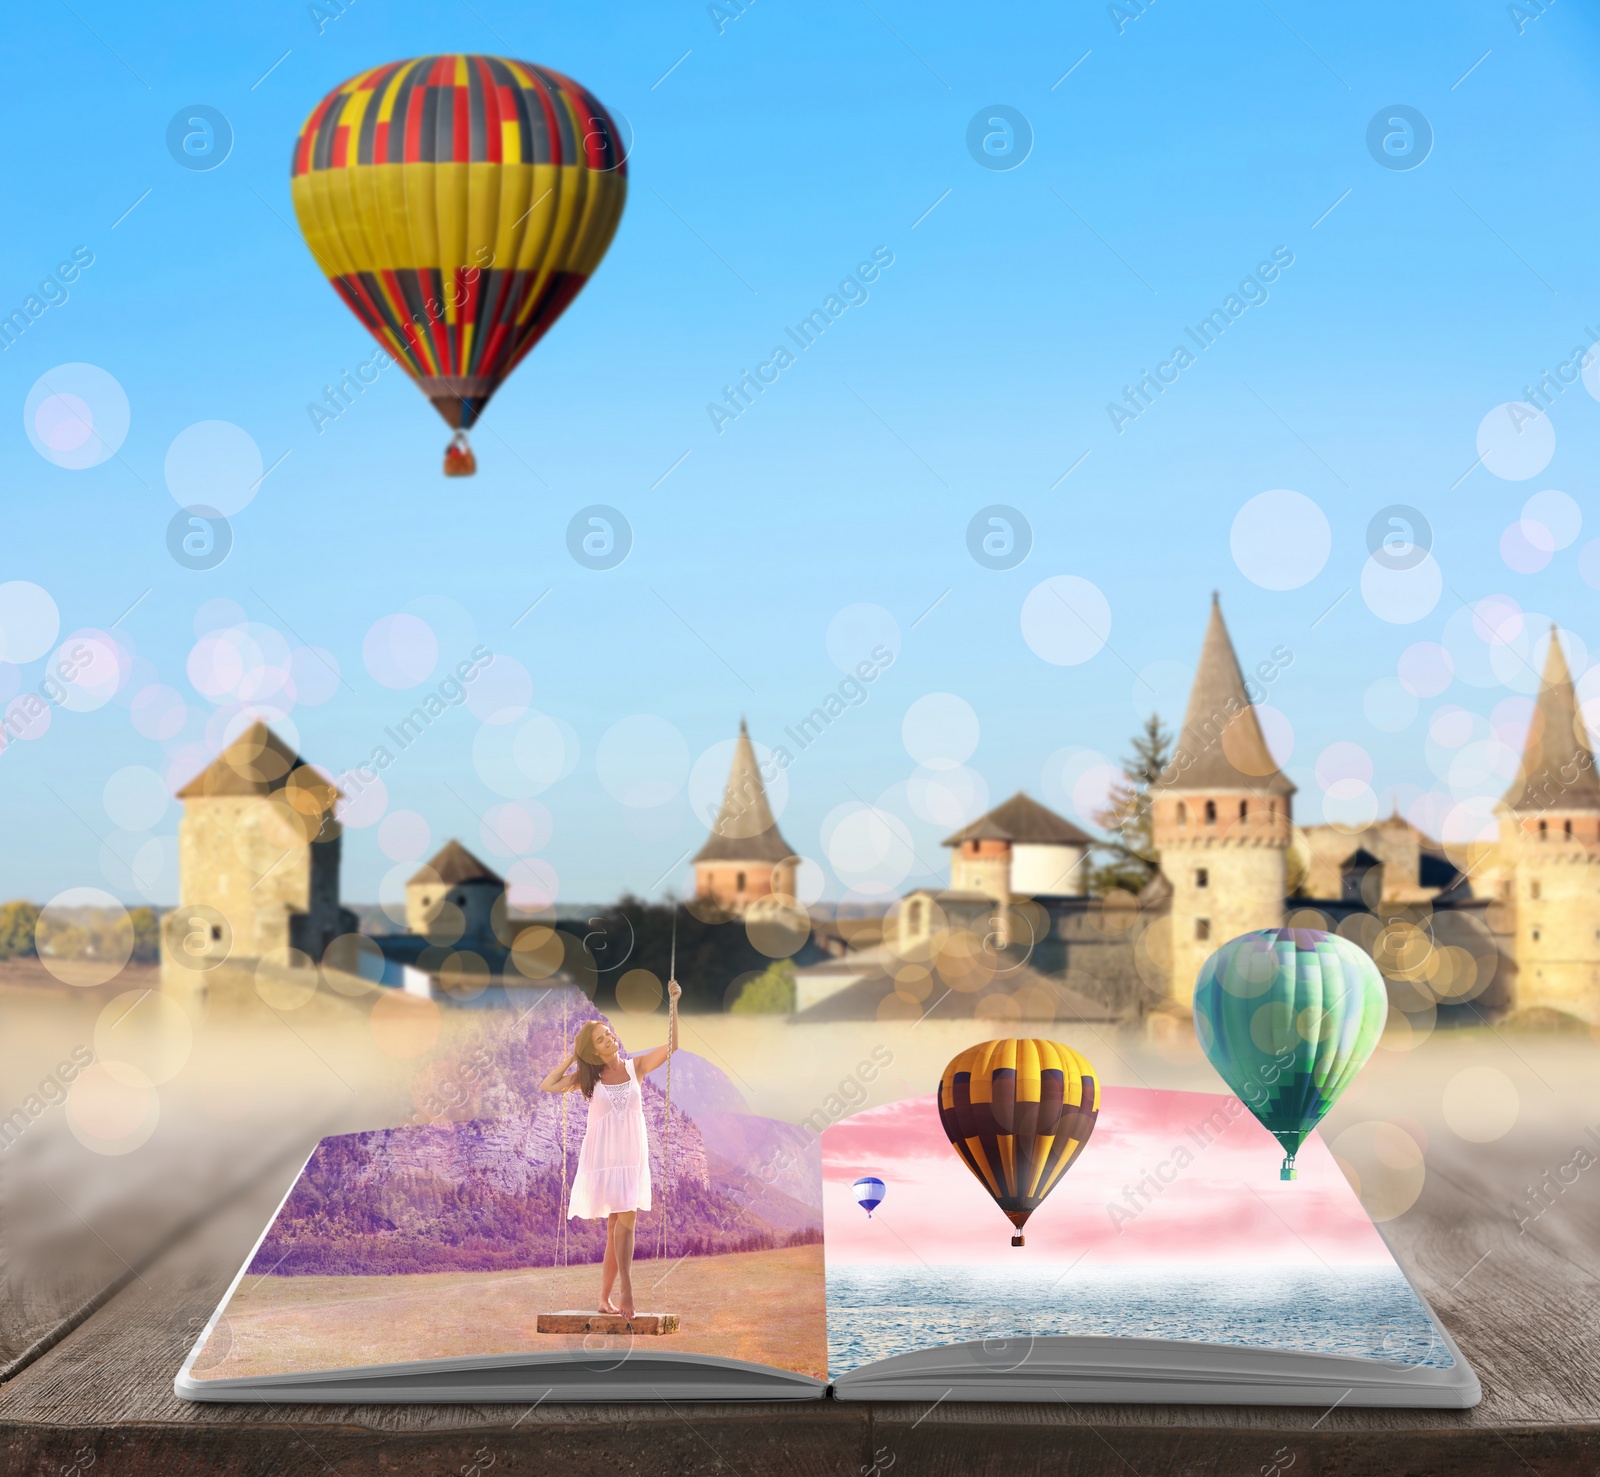 Image of Fantasy worlds in fairytales. Book, hot air balloons and enchanted castle on background